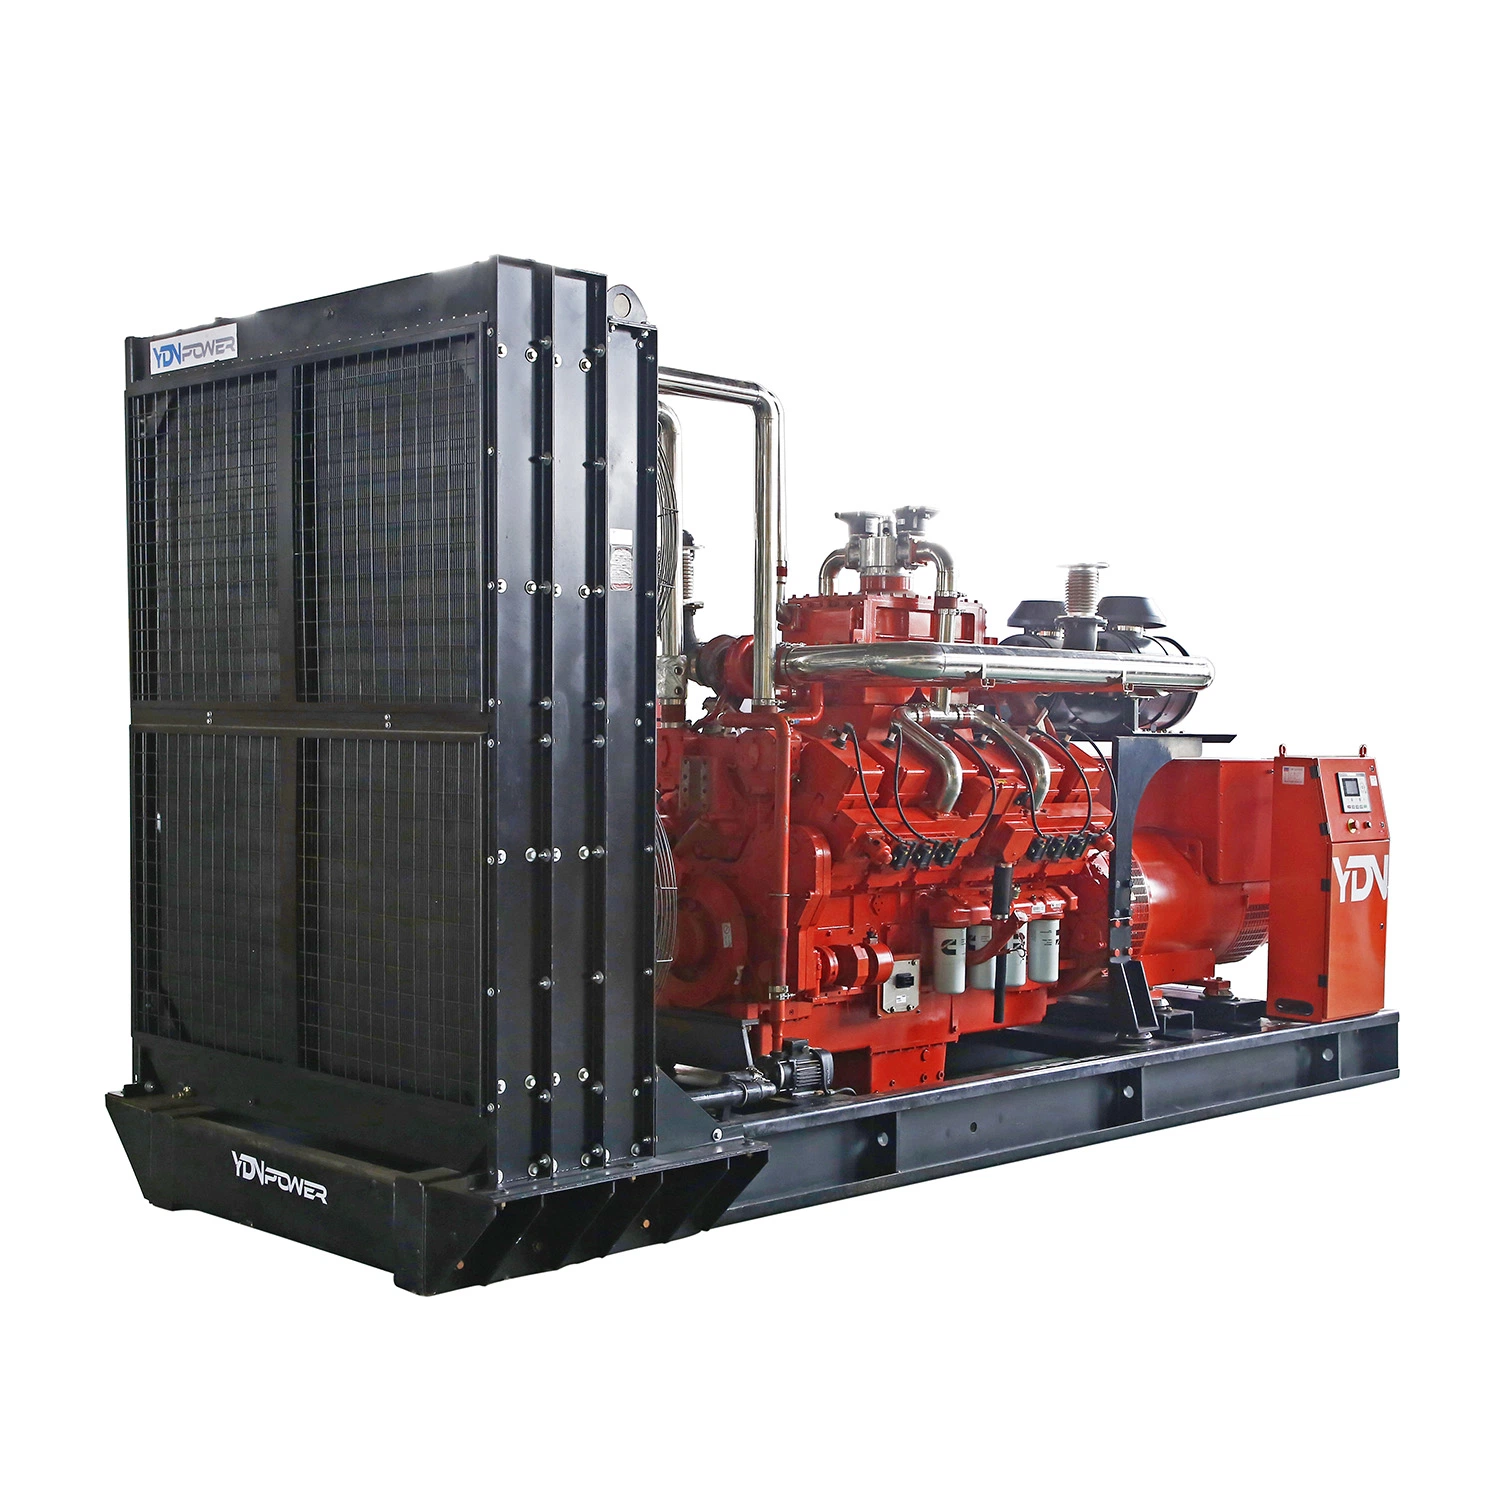 625kVA Gas Generator Powered by Cummins Engine with Silent Canopy for Mining